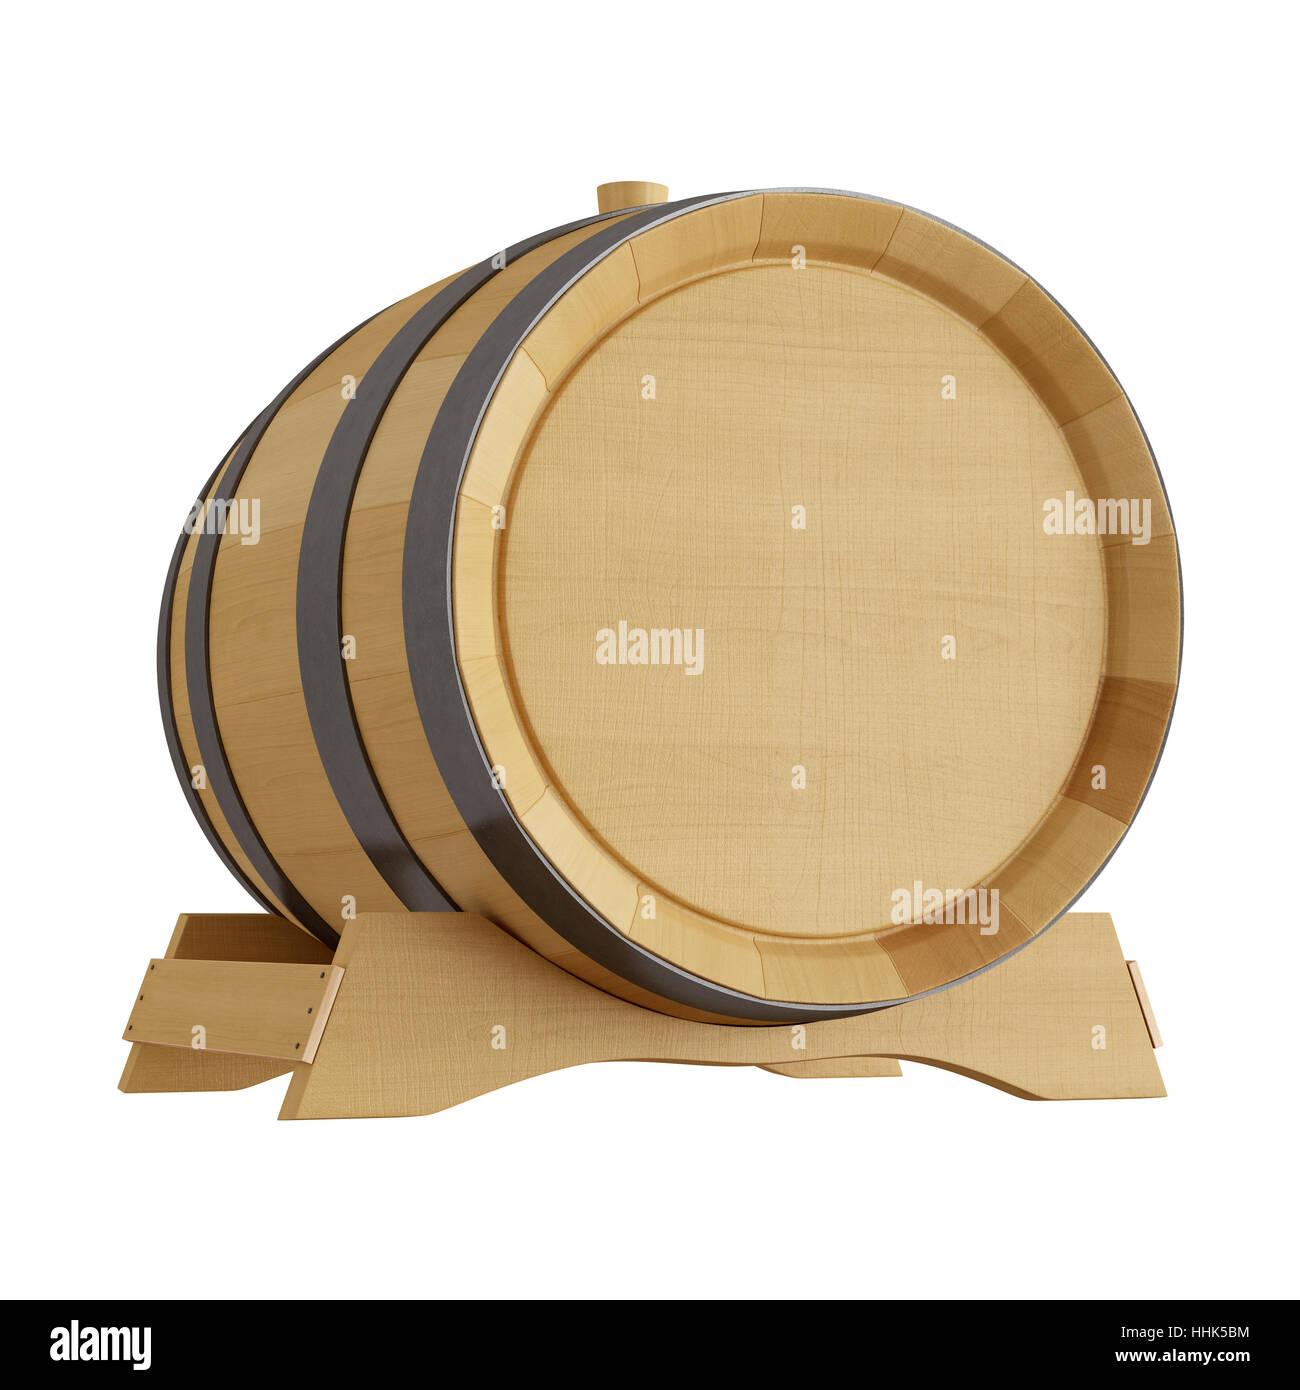 isolated, wood, wine, alcohol, oak, container, barrel, storage, wooden, Stock Photo